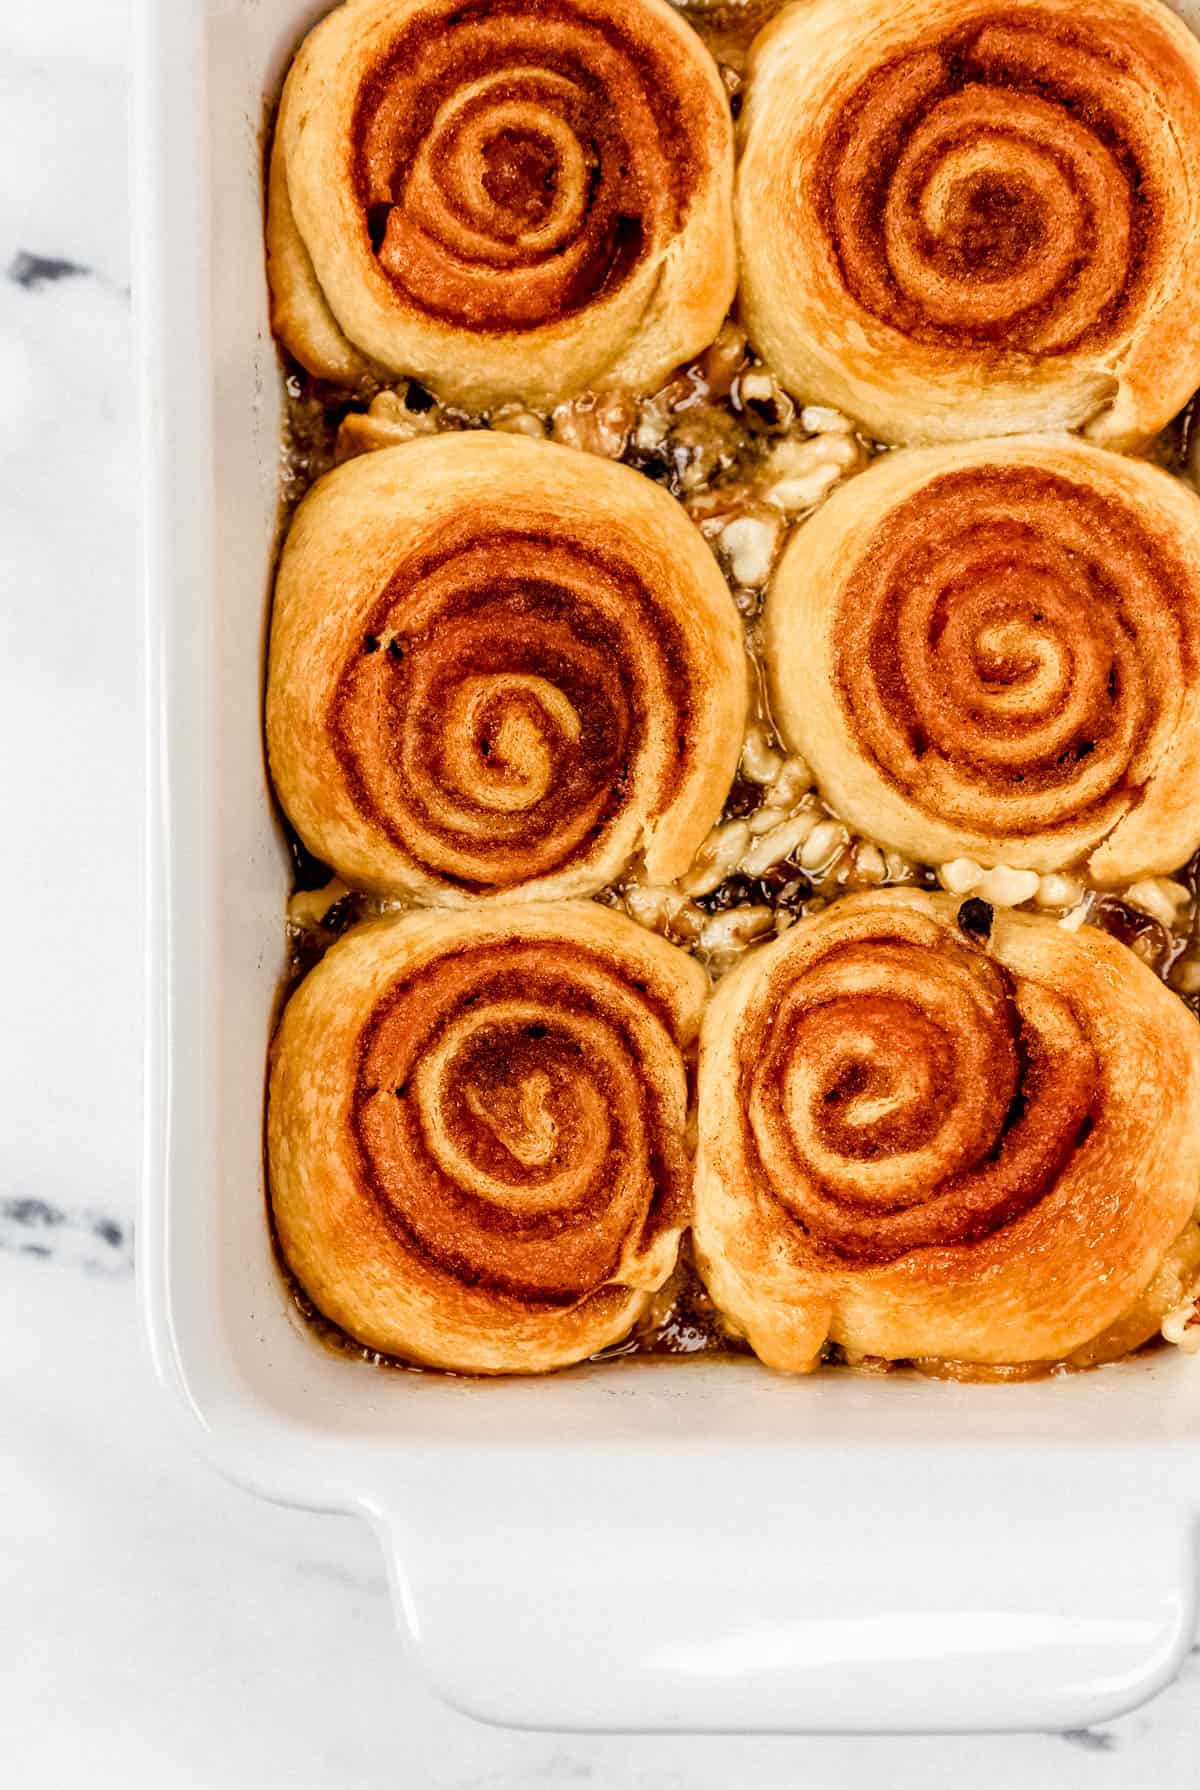 Overhead view of finished sticky buns in a baking dish on marble surface. 